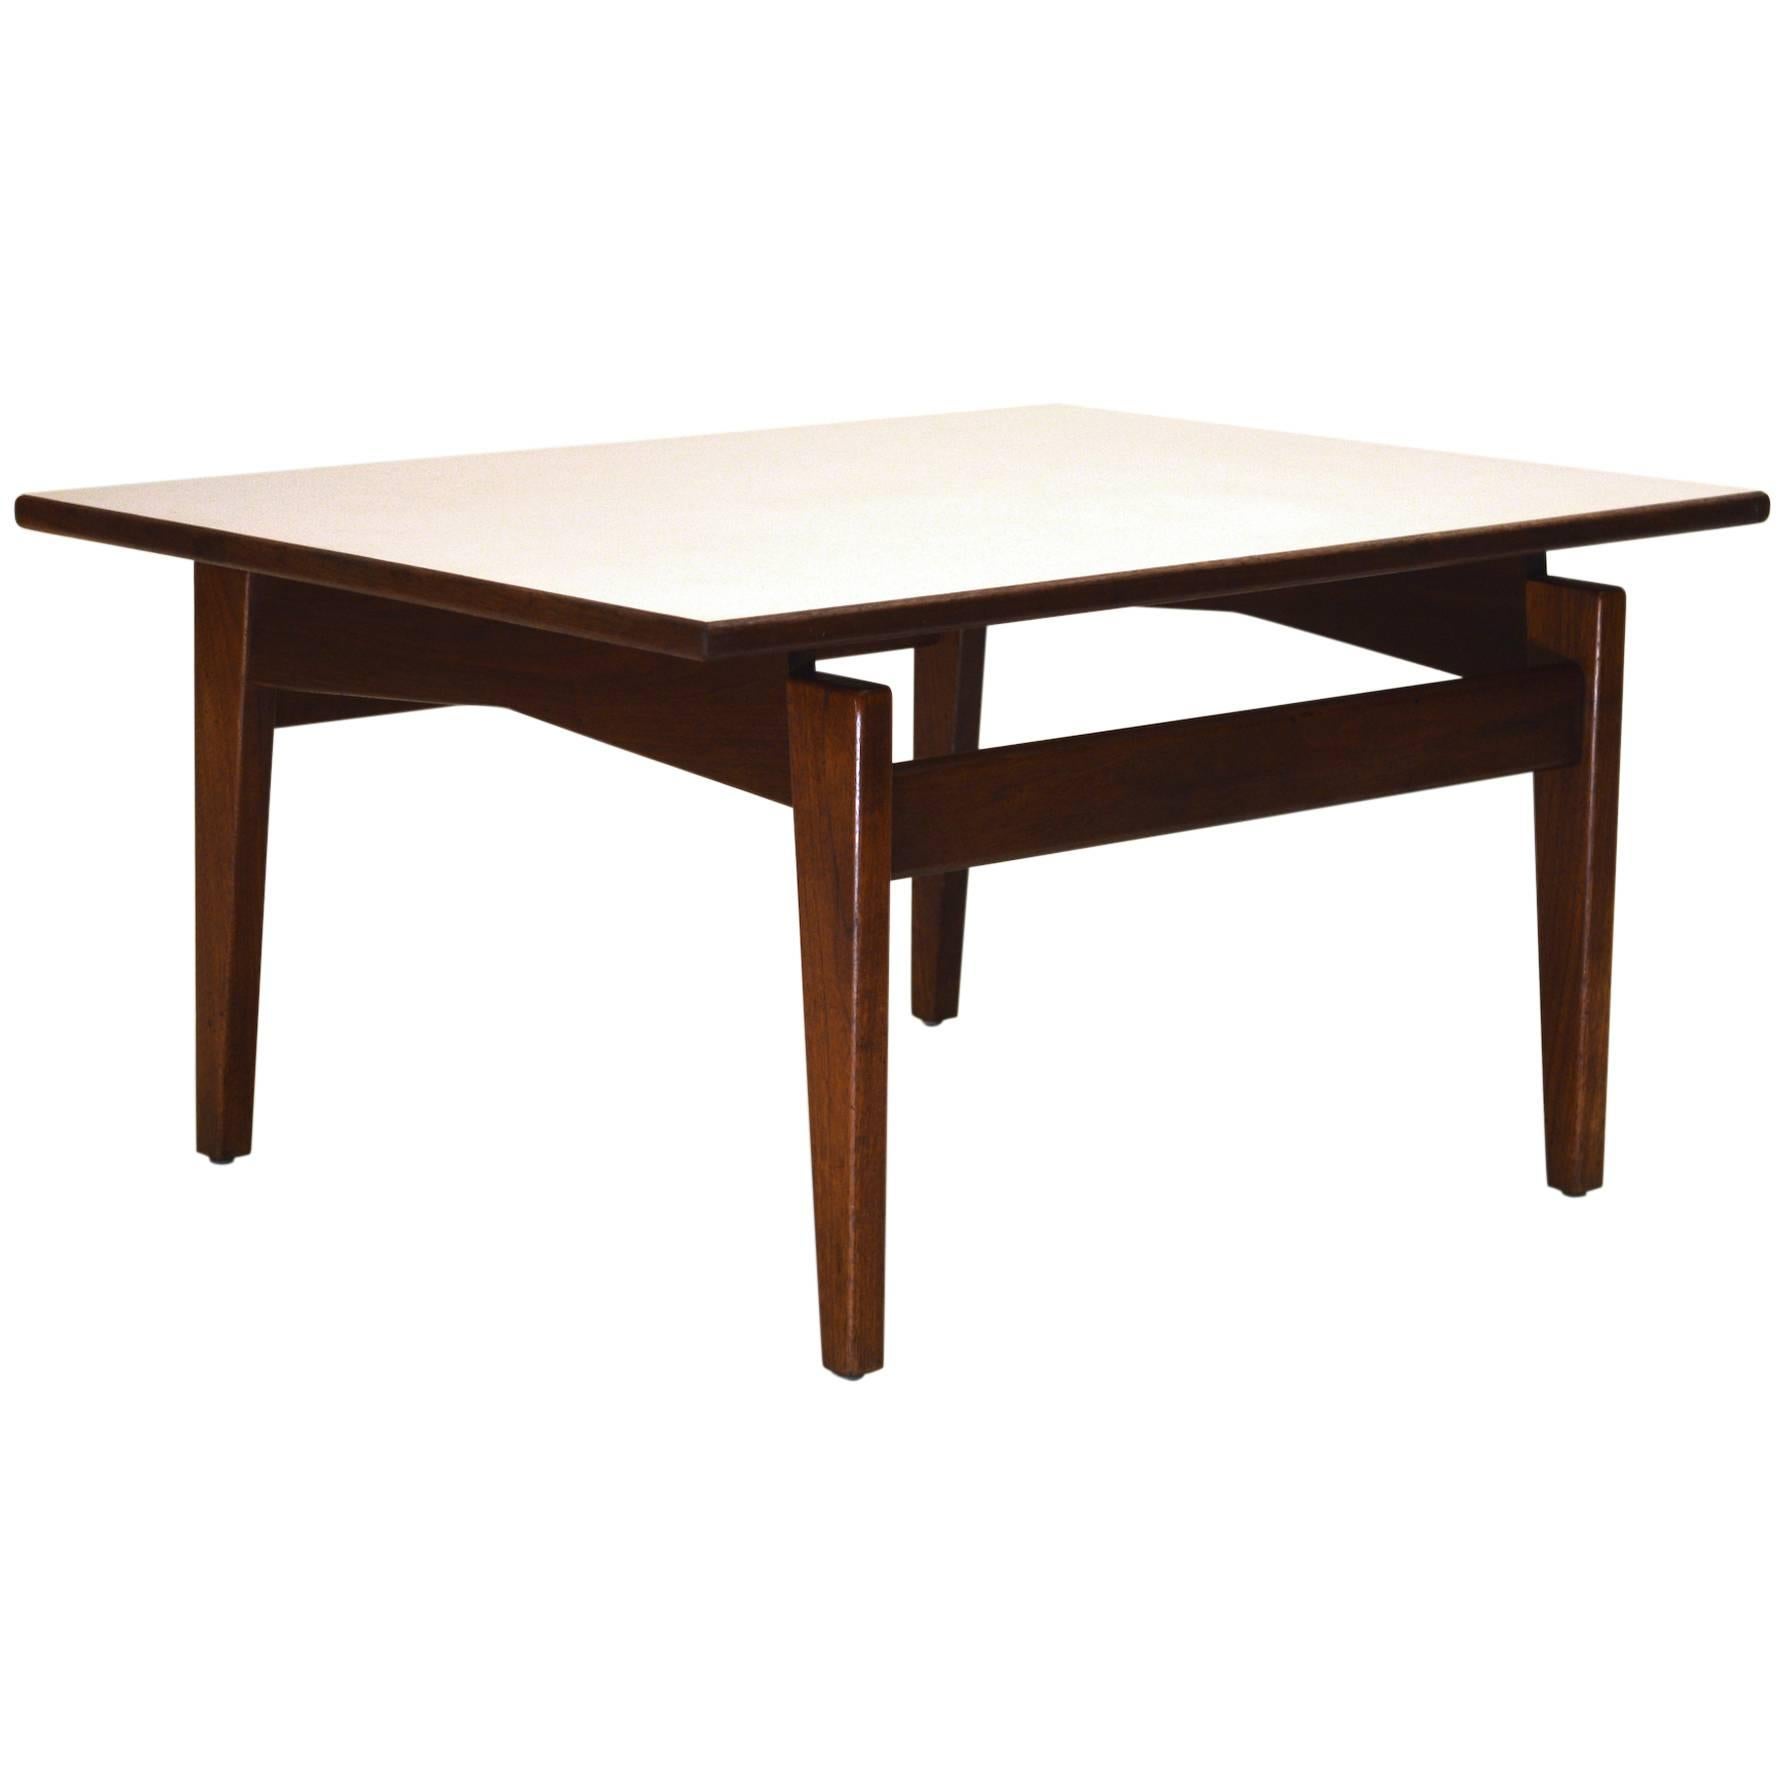 Exceptional Vintage Table by Jens Risom in Walnut and Framed Formica